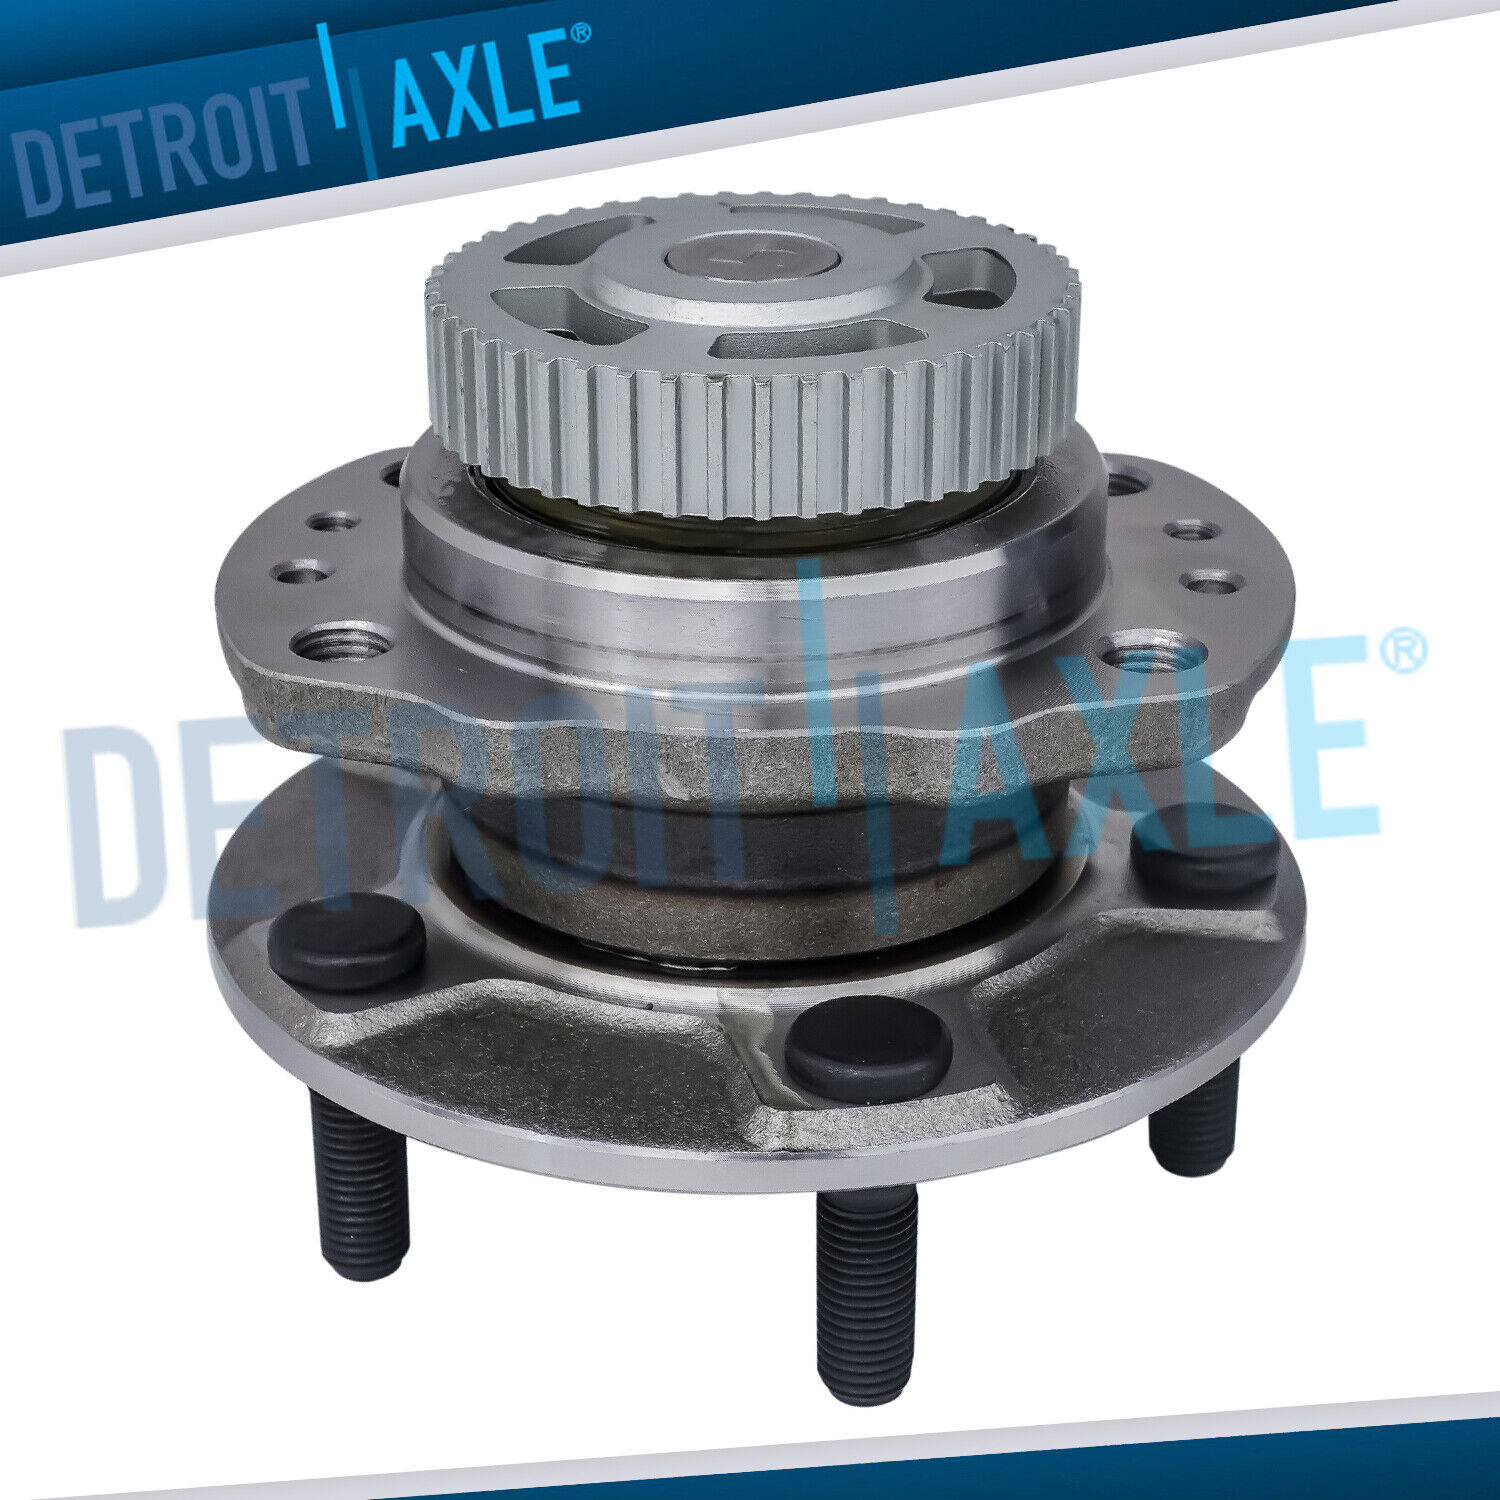 New REAR Wheel Hub and Bearing Assembly for Dodge Grand Caravan w/ ABS